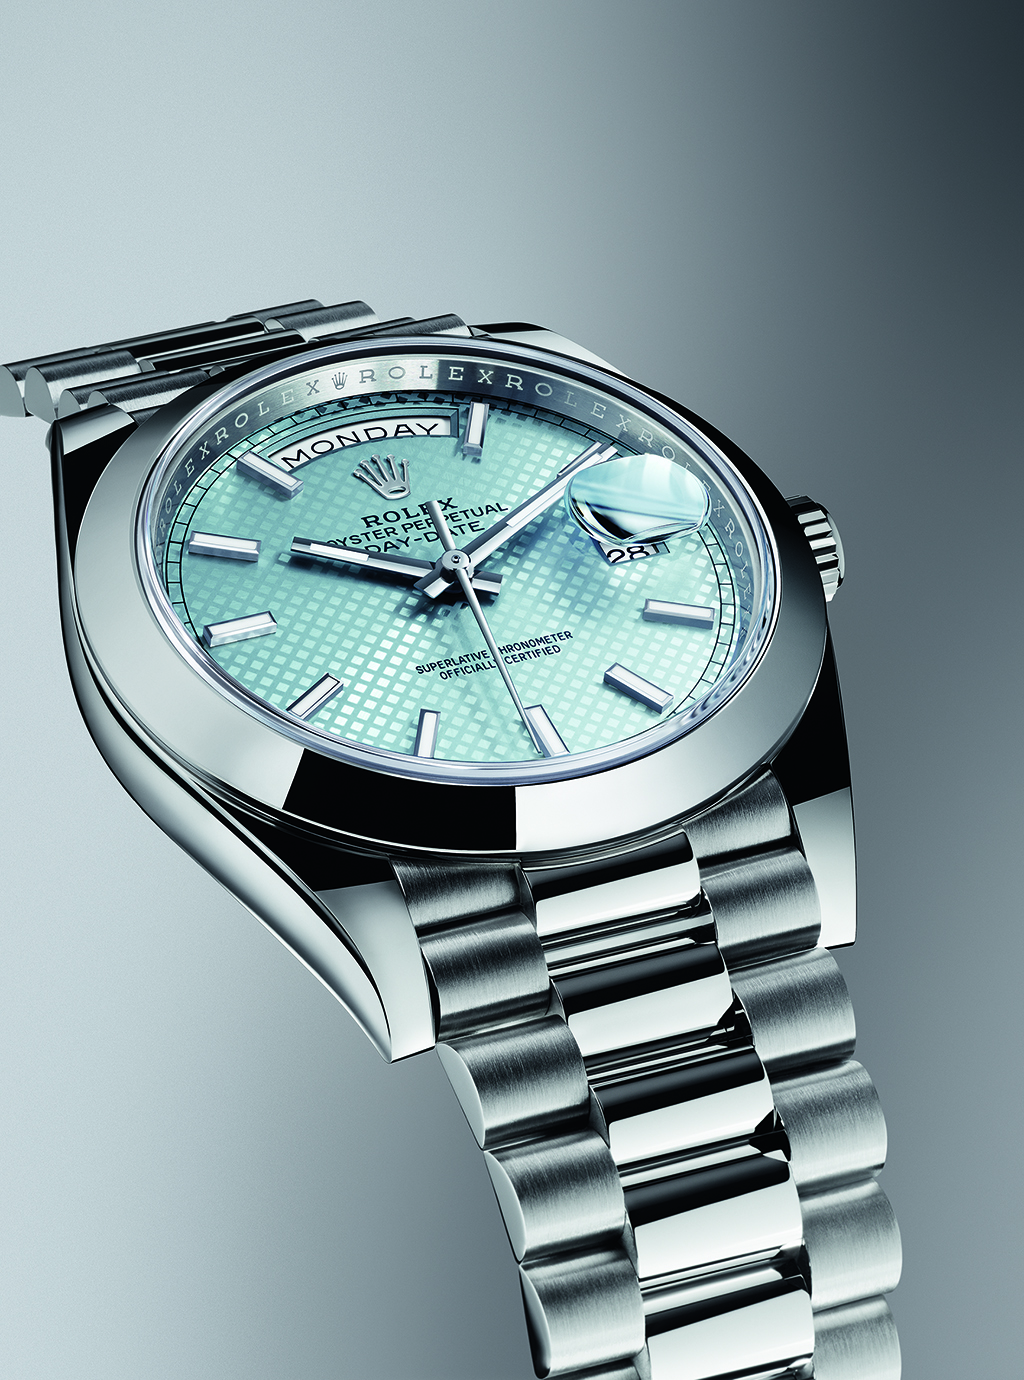 Rolex Oyster Perpetual Day-Date 40 in platinum with an ice blue dial with diagonal motif on sunray finish.